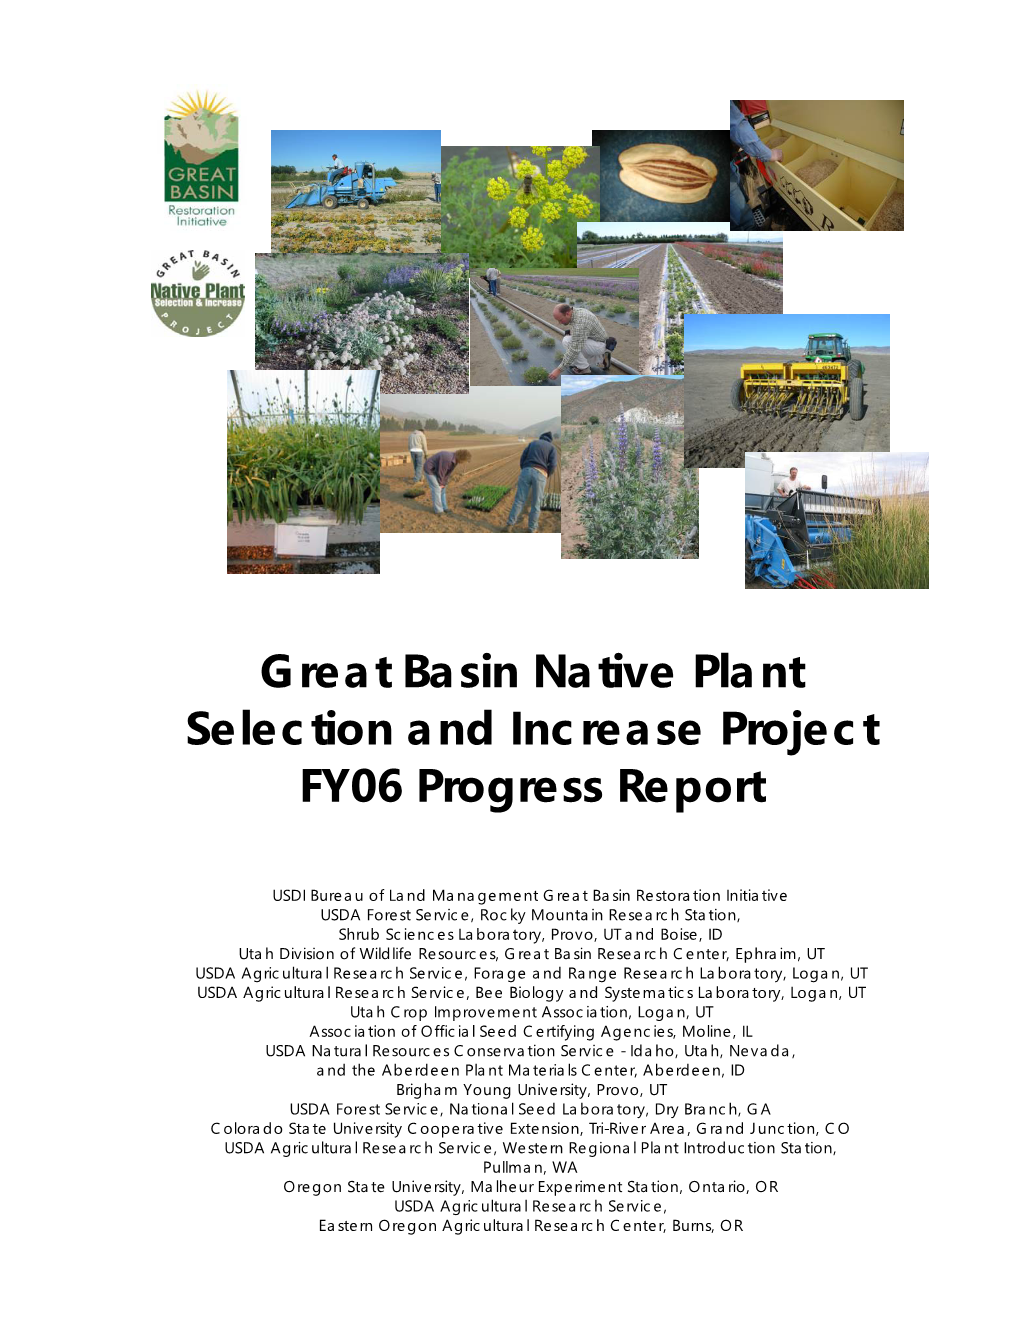 Great Basin Native Plant Selection and Increase Project: 2006